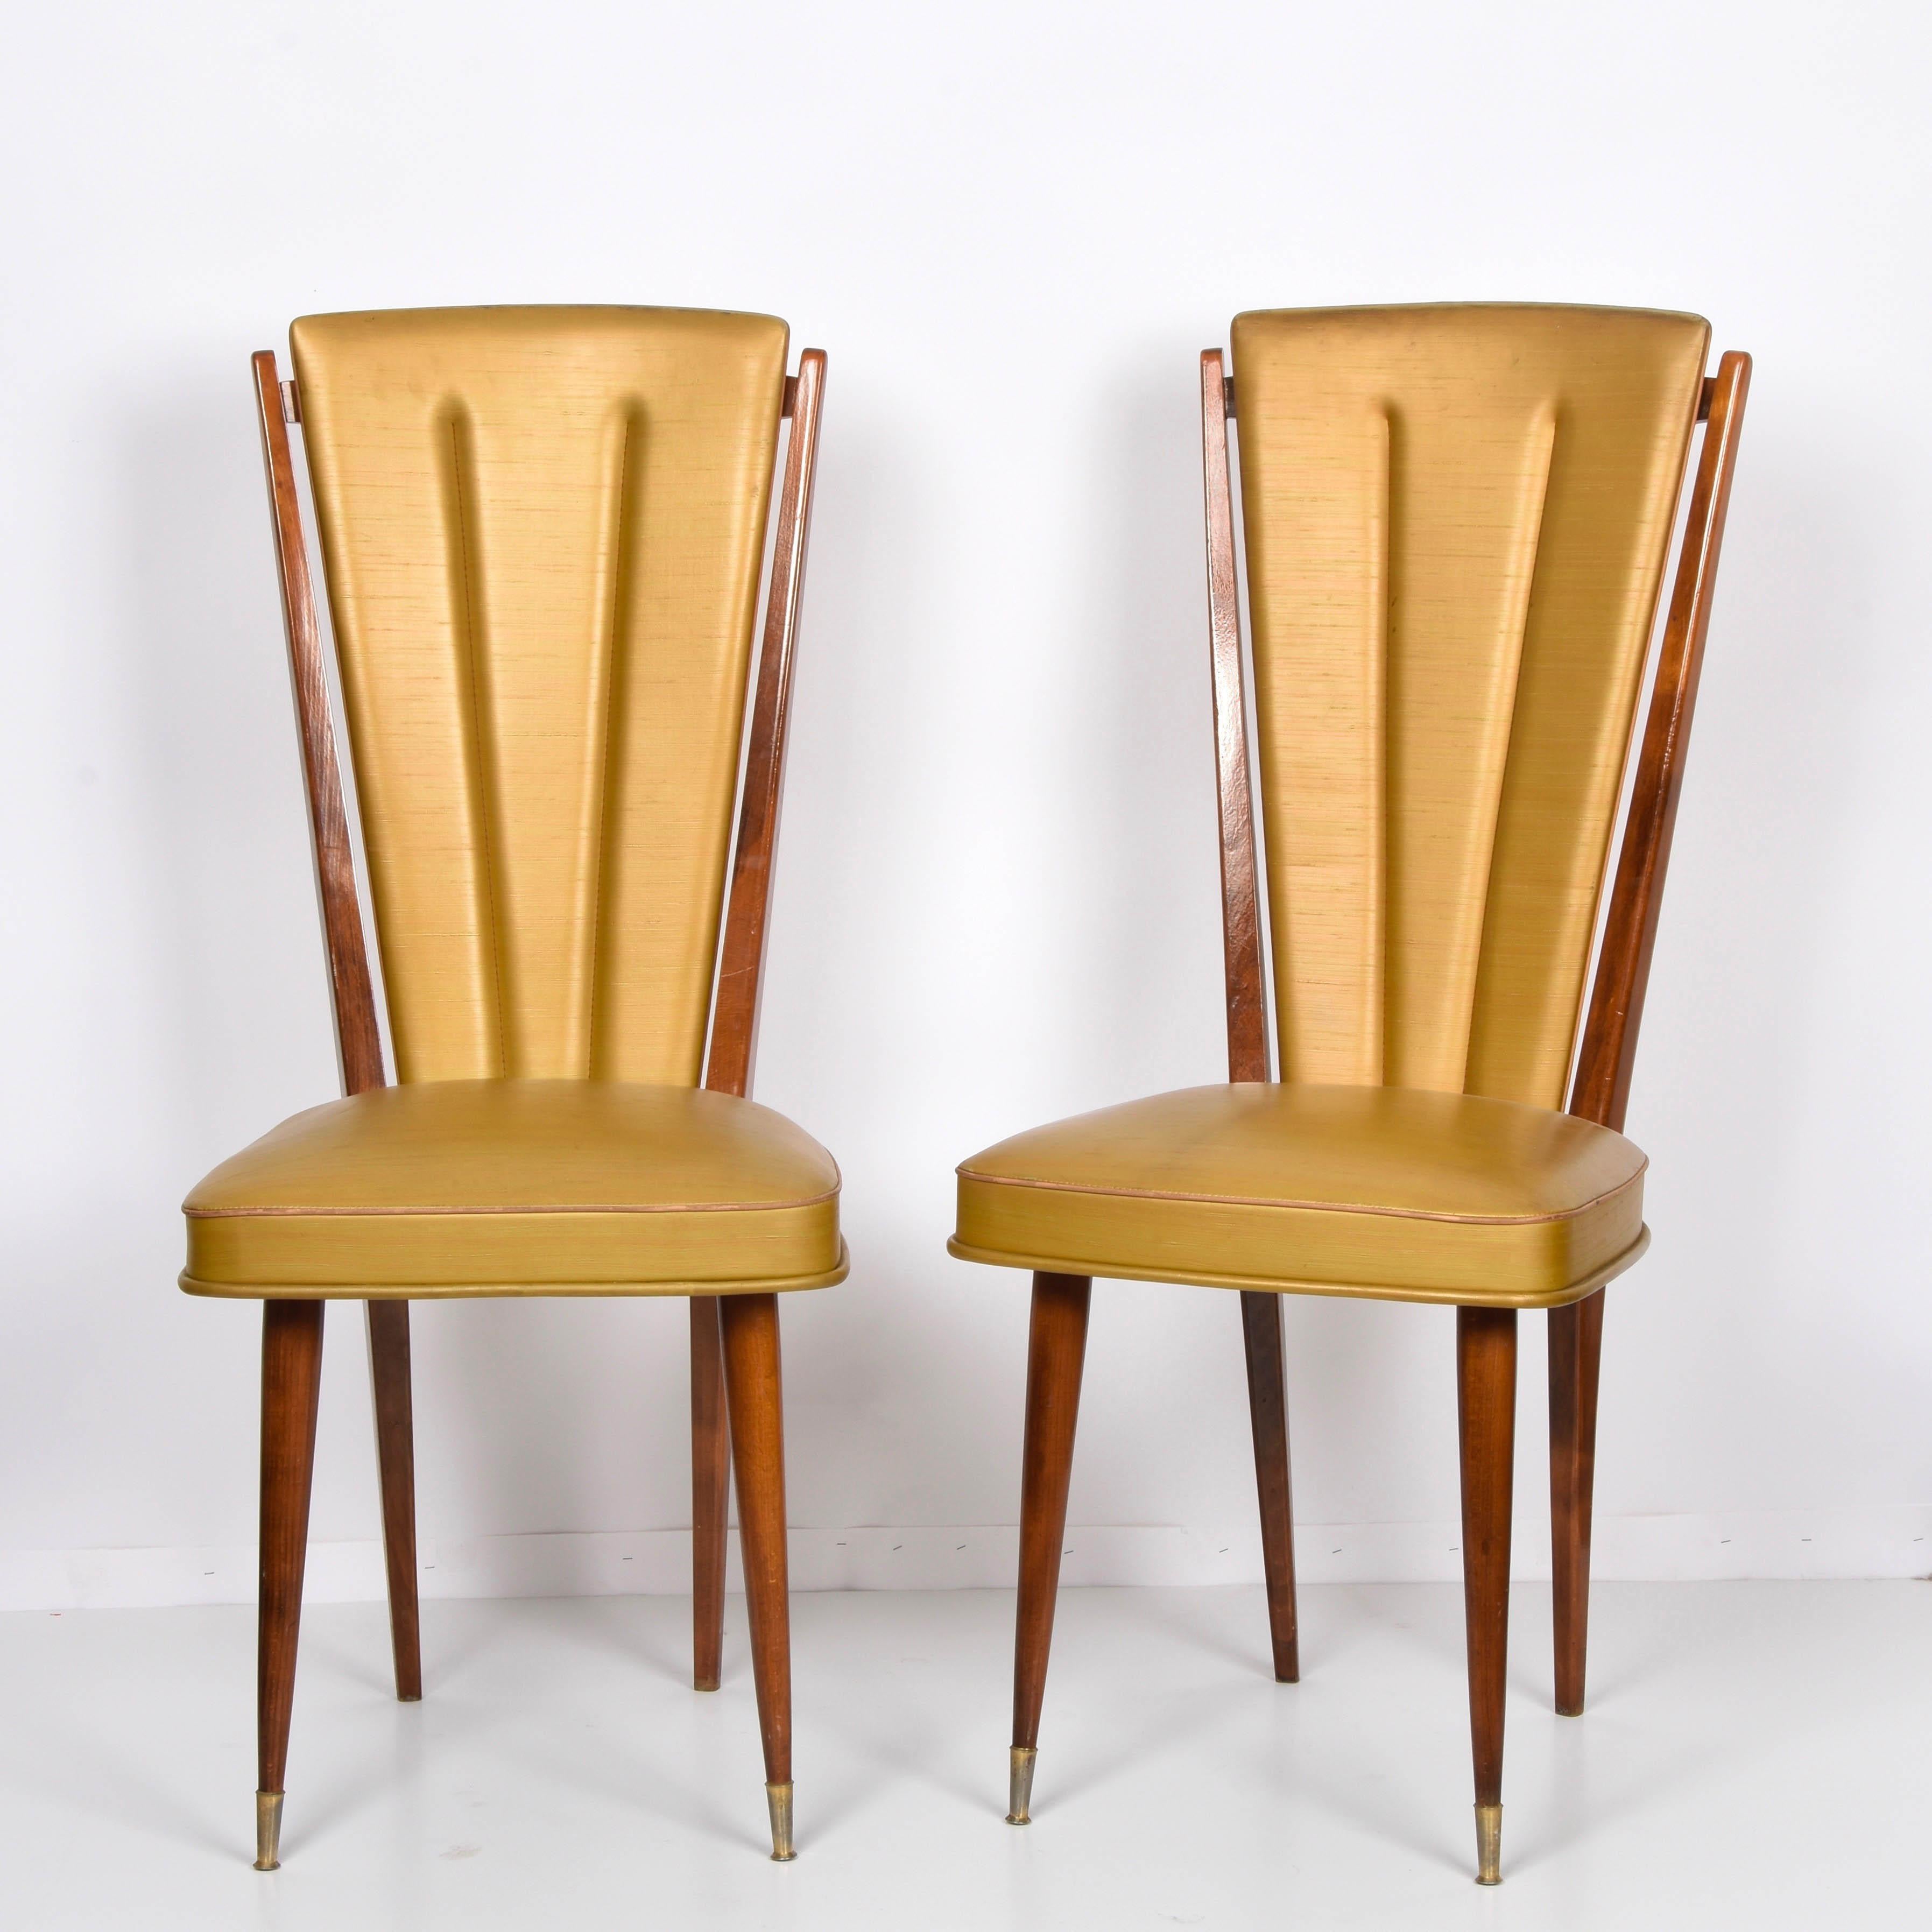 Pair of Ameublement NF Beech and Beige Vinyl Upholstered Dining Chairs, 1950s In Good Condition For Sale In Roma, IT